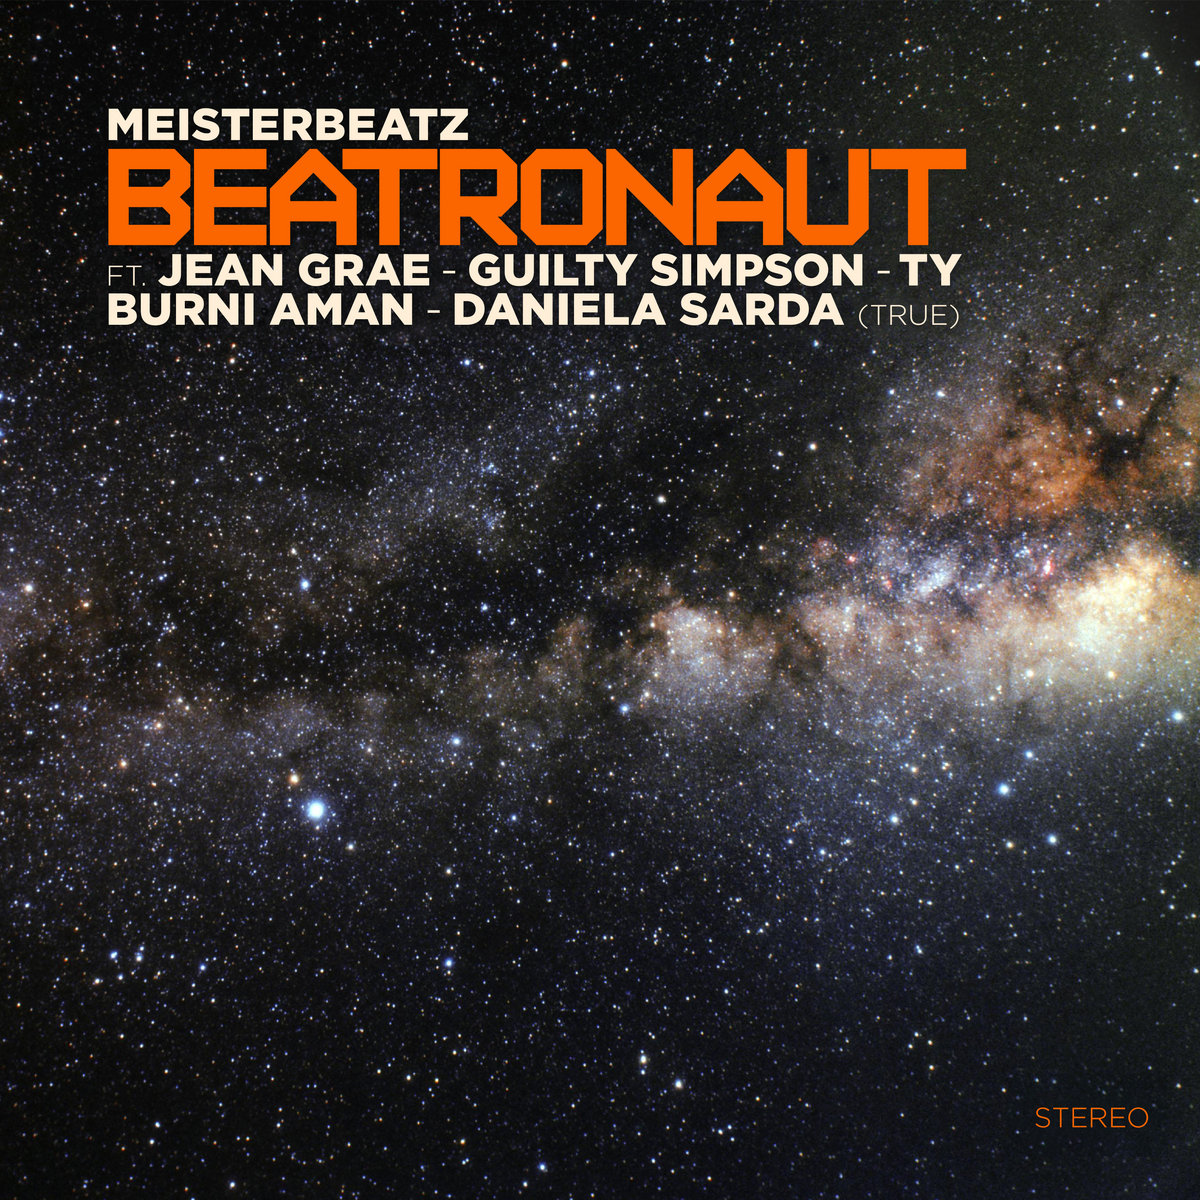 Art for Masters Of The Humanverse  (Switzerland, South Africa, USA) by Meisterbeatz ft.Jean Grae and Burni Aman